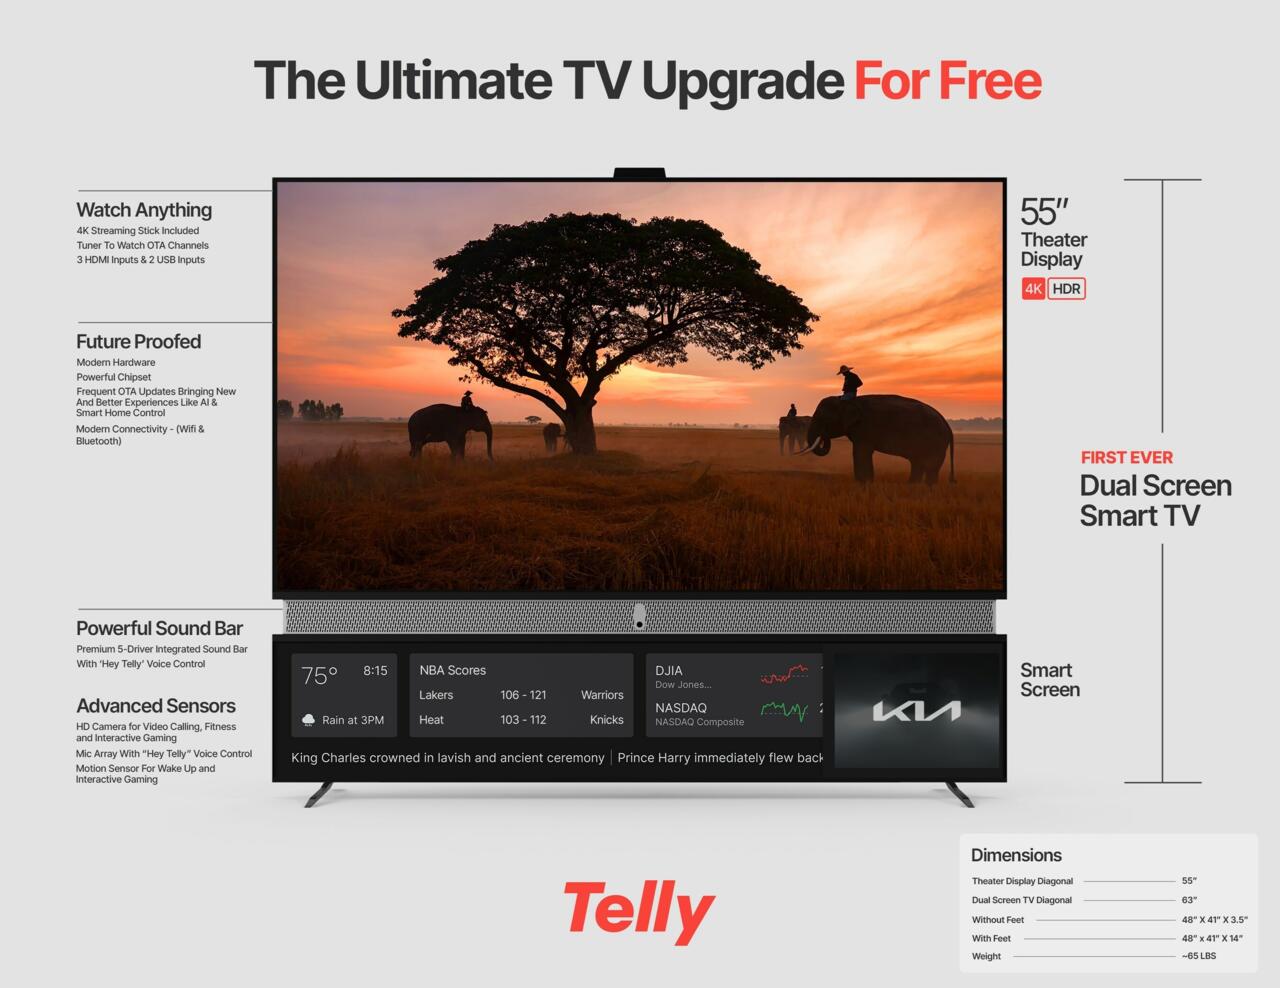 Telly is a free TV that shows ads constantly